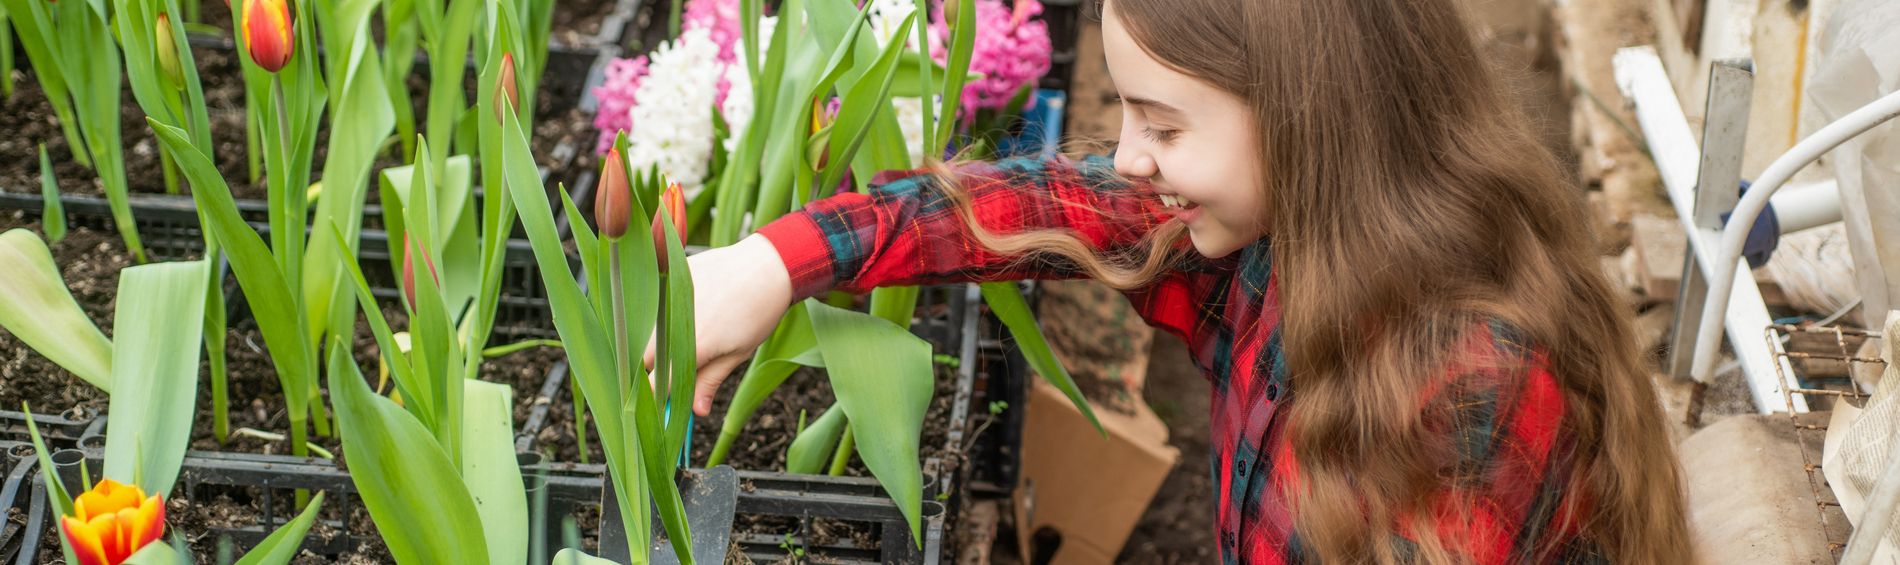 Find Your Summer Job in the Horticulture Industry